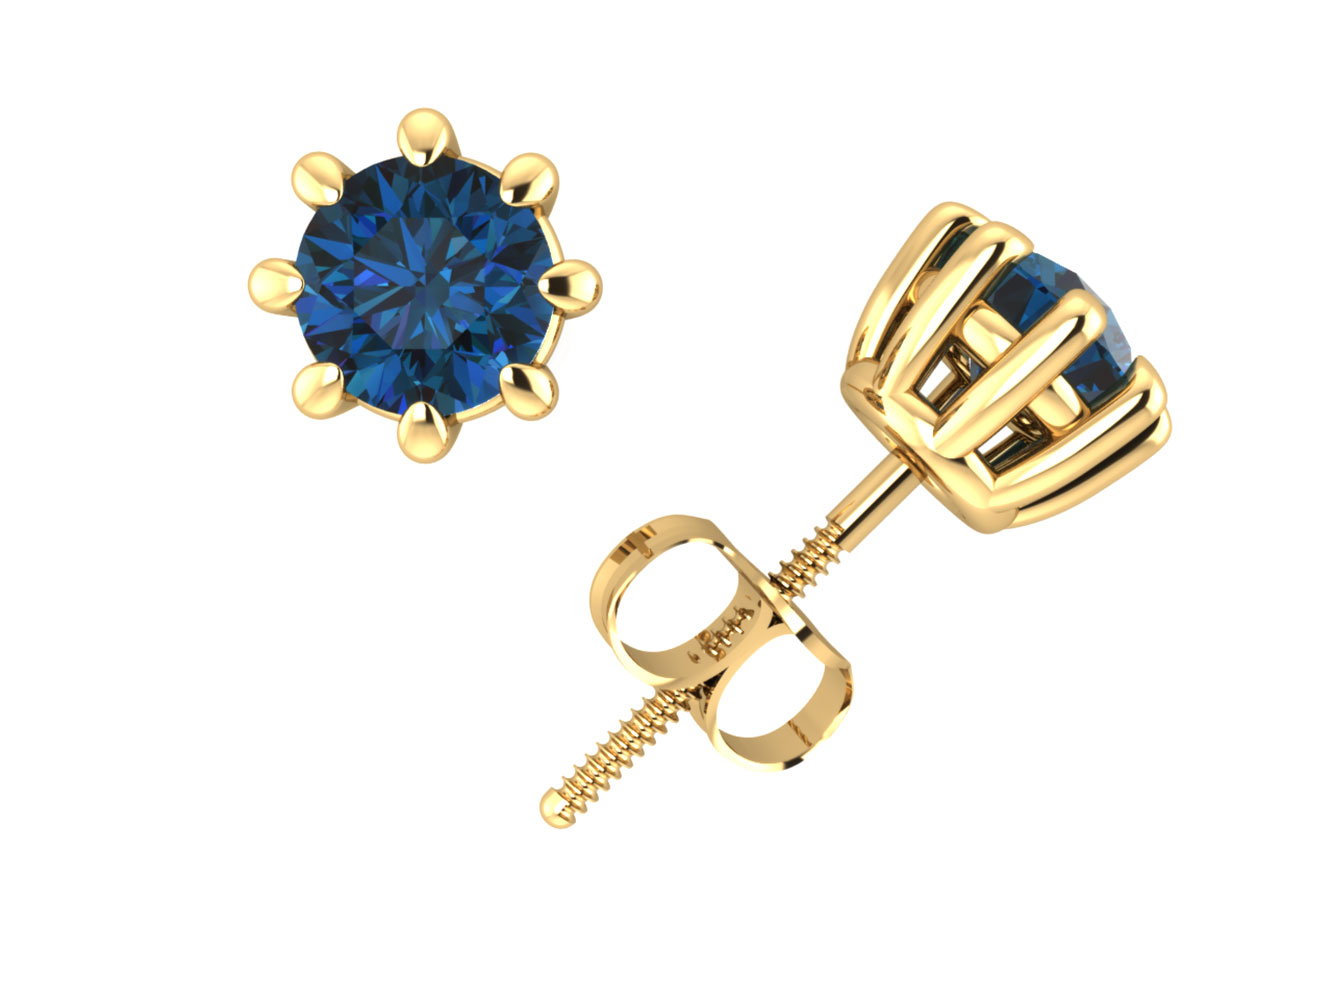 Jewel We Sell 3/4Carat Round Cut Blue Diamond Basket Stud Earrings 14k White or Yellow Gold 8Prong I1